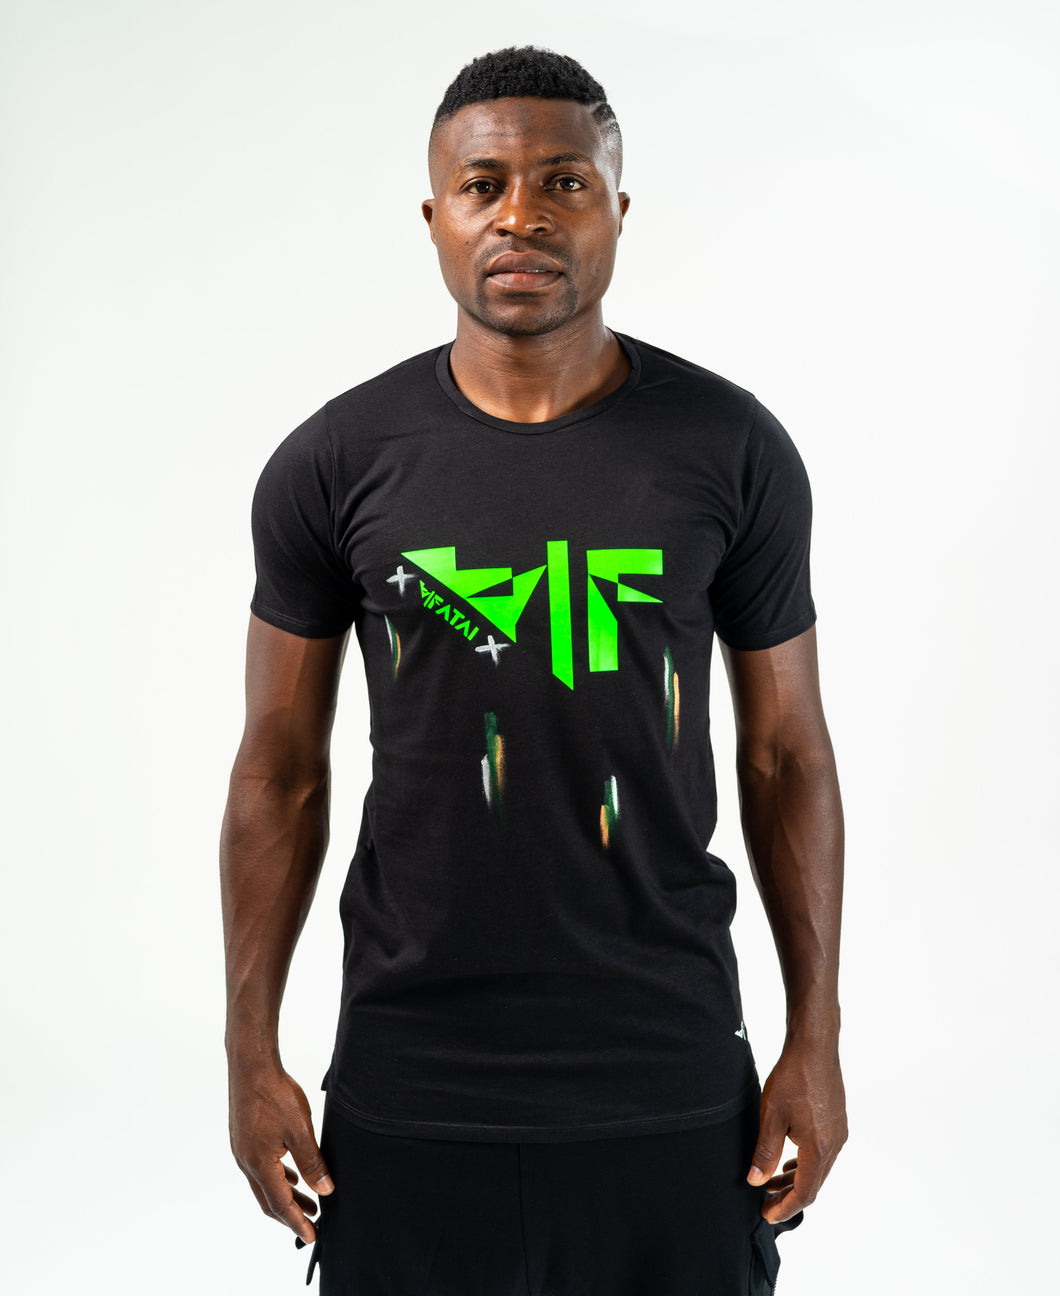 Black t-shirt with green logo - painted - Fatai Style